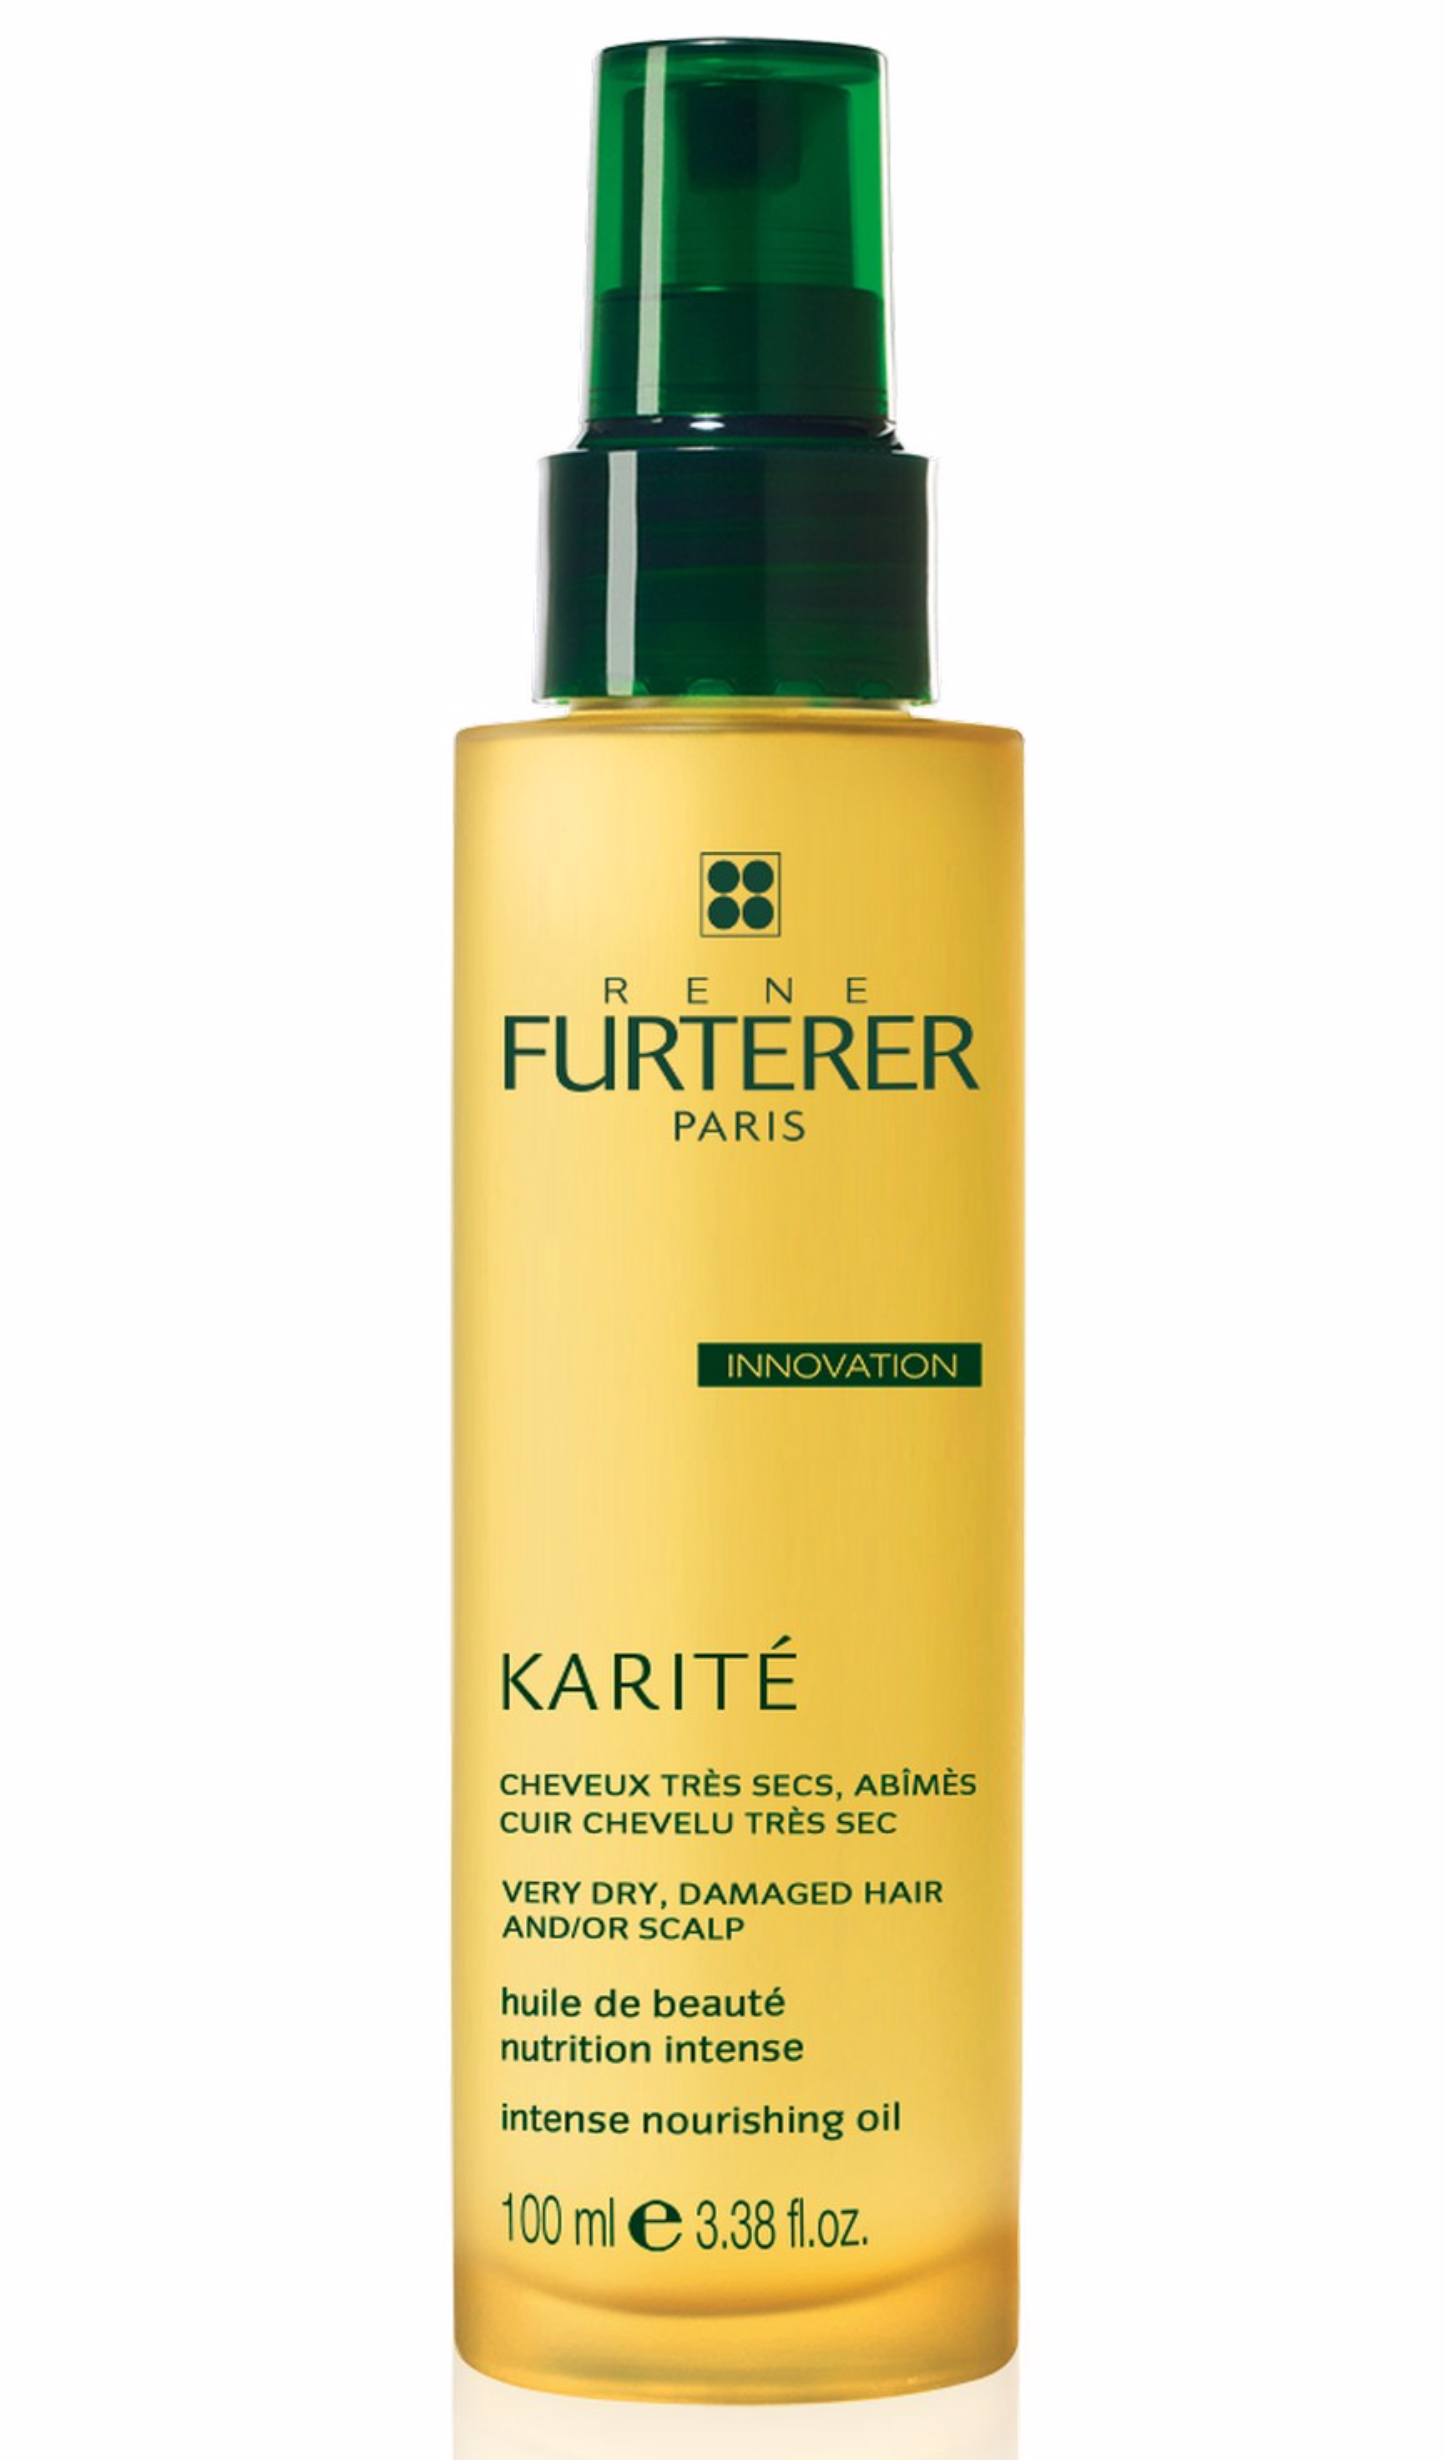 Shop Rene Furterer KARITE Intense Nourishing Oil at New London Pharmacy. Rene Furterer KARITE intense nourishing oil is a deep-conditioning, pre-shampoo treatment that helps to nourish and revitalize very dry hair. Free shipping on all orders of $50.00.